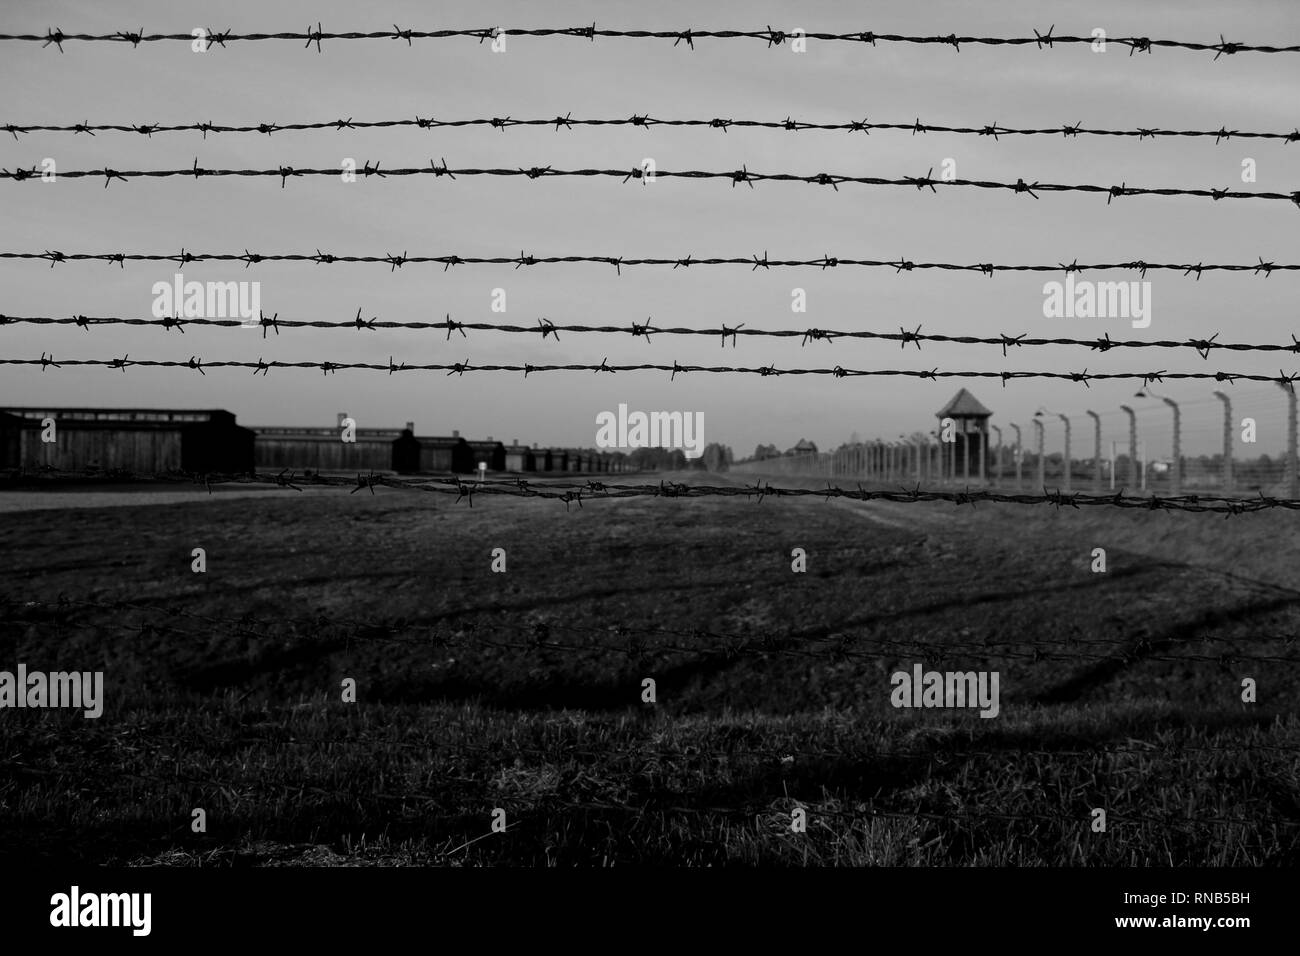 Buildings at Auschwitz through barbed wire Stock Photo